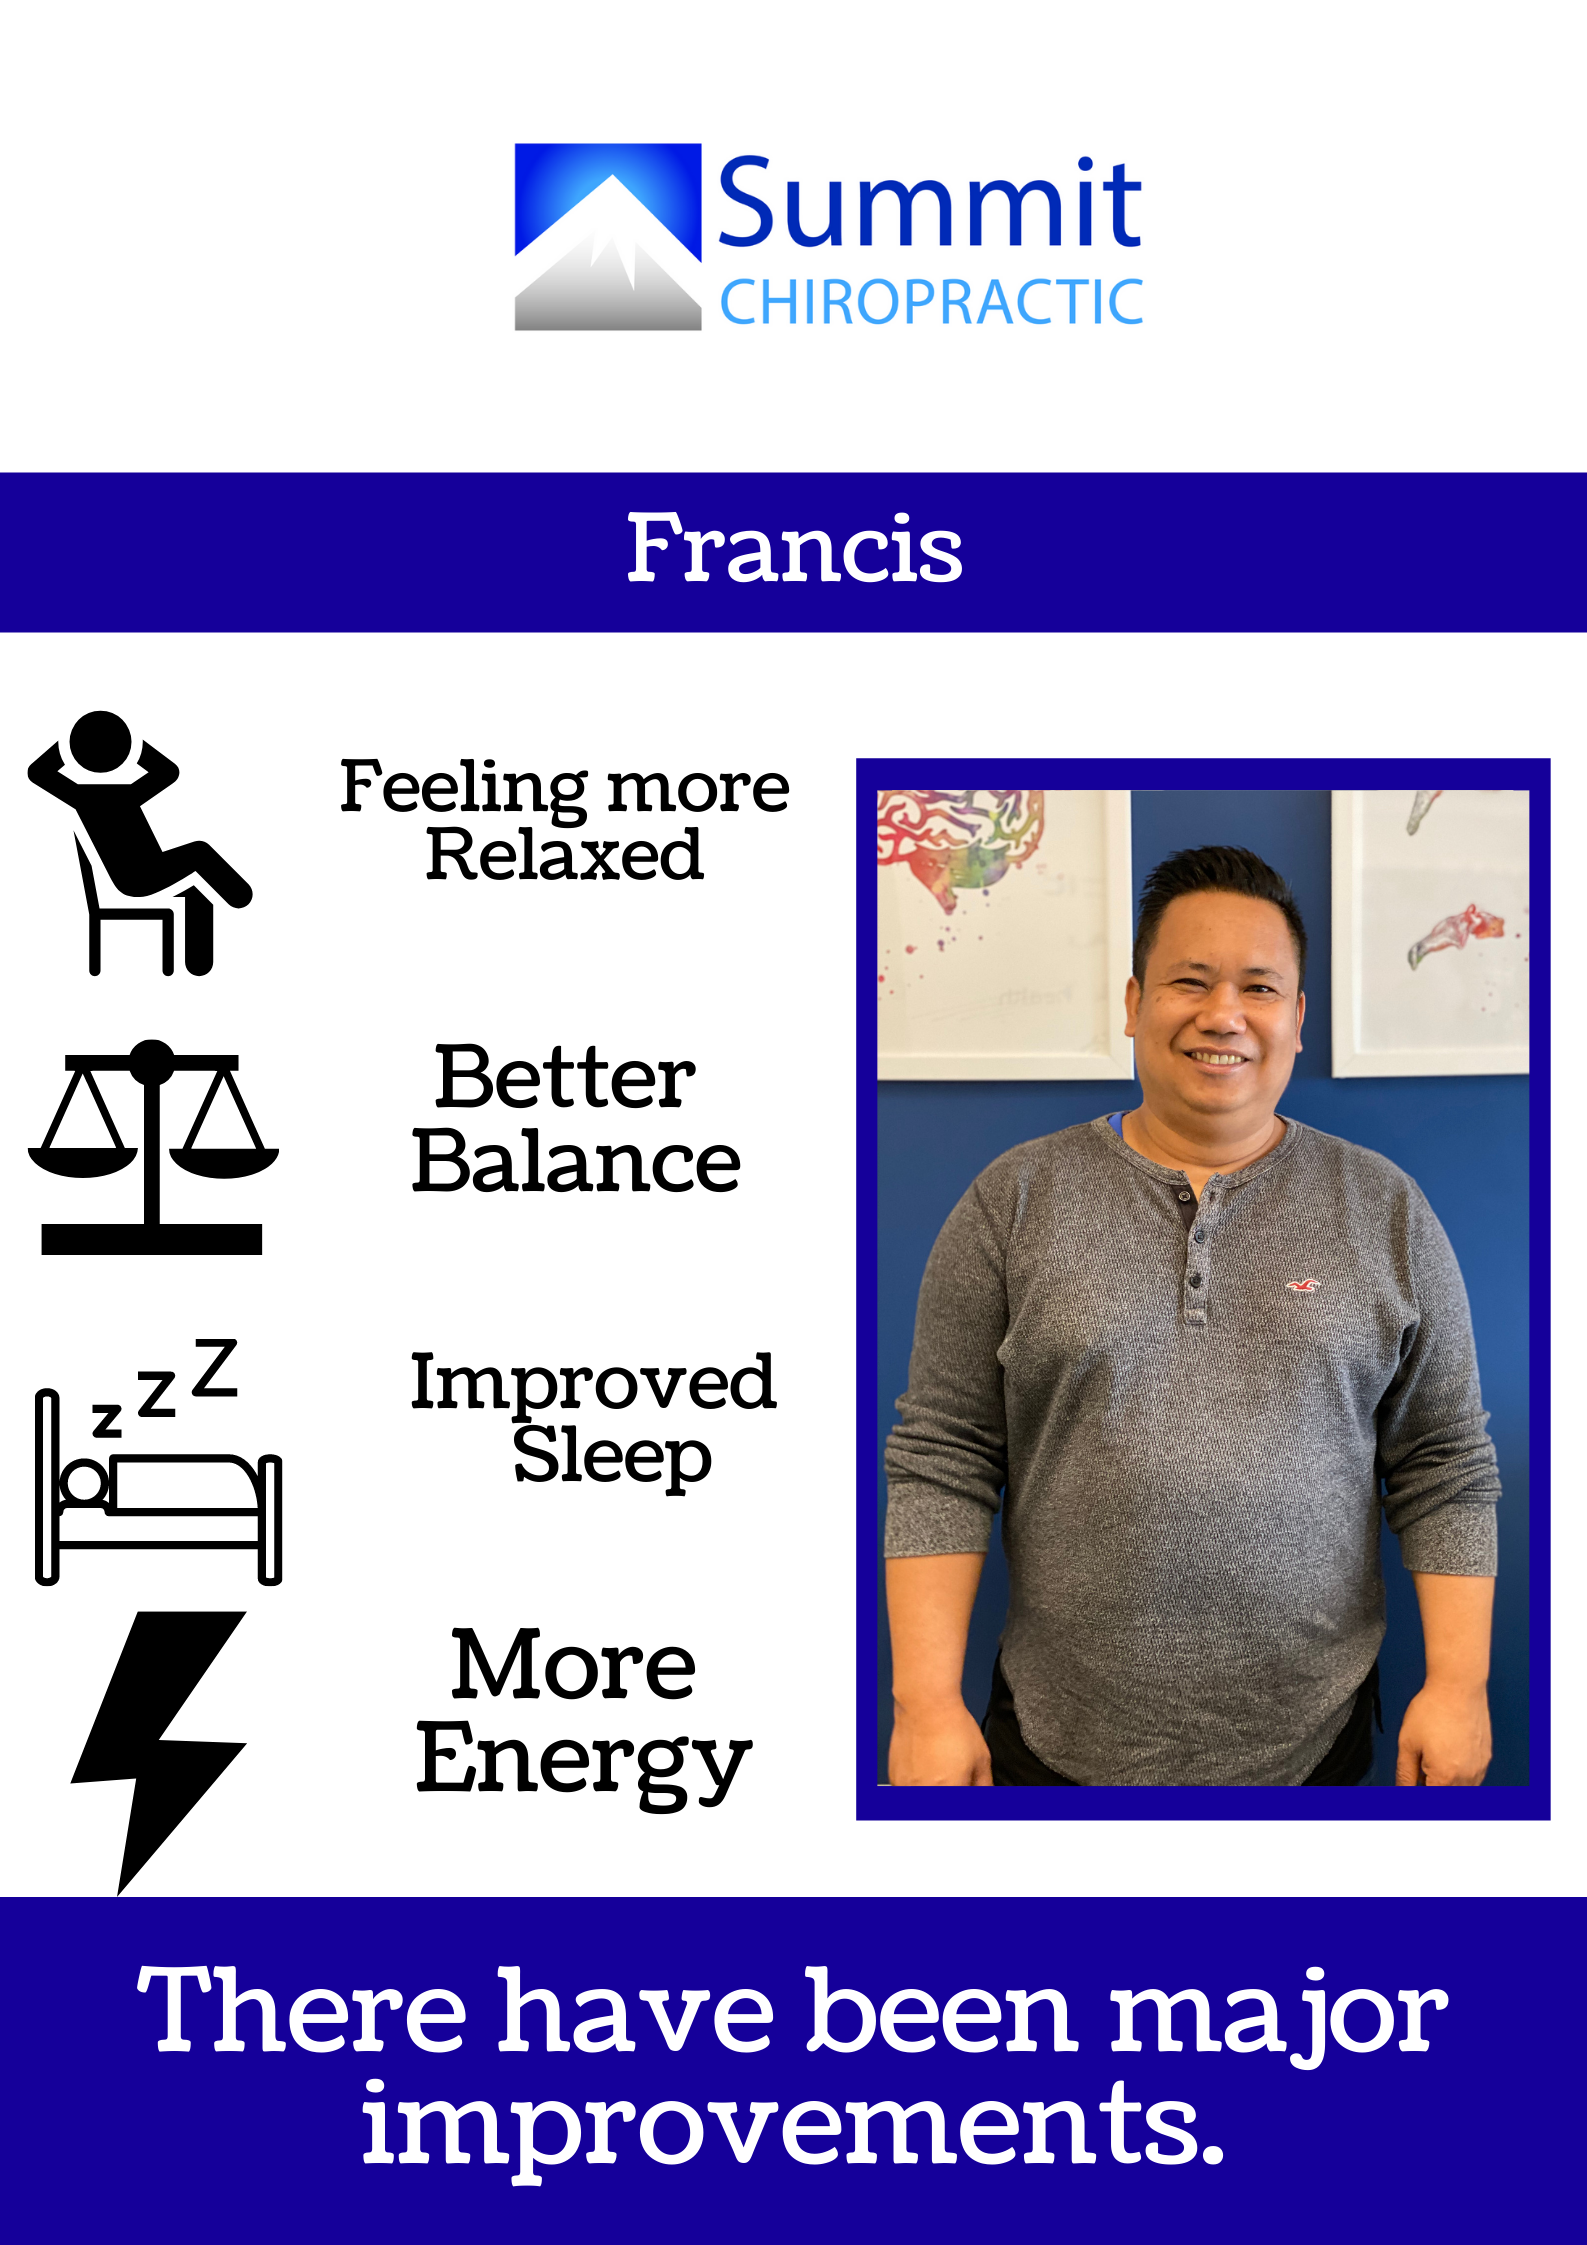 Francis - more relaxed